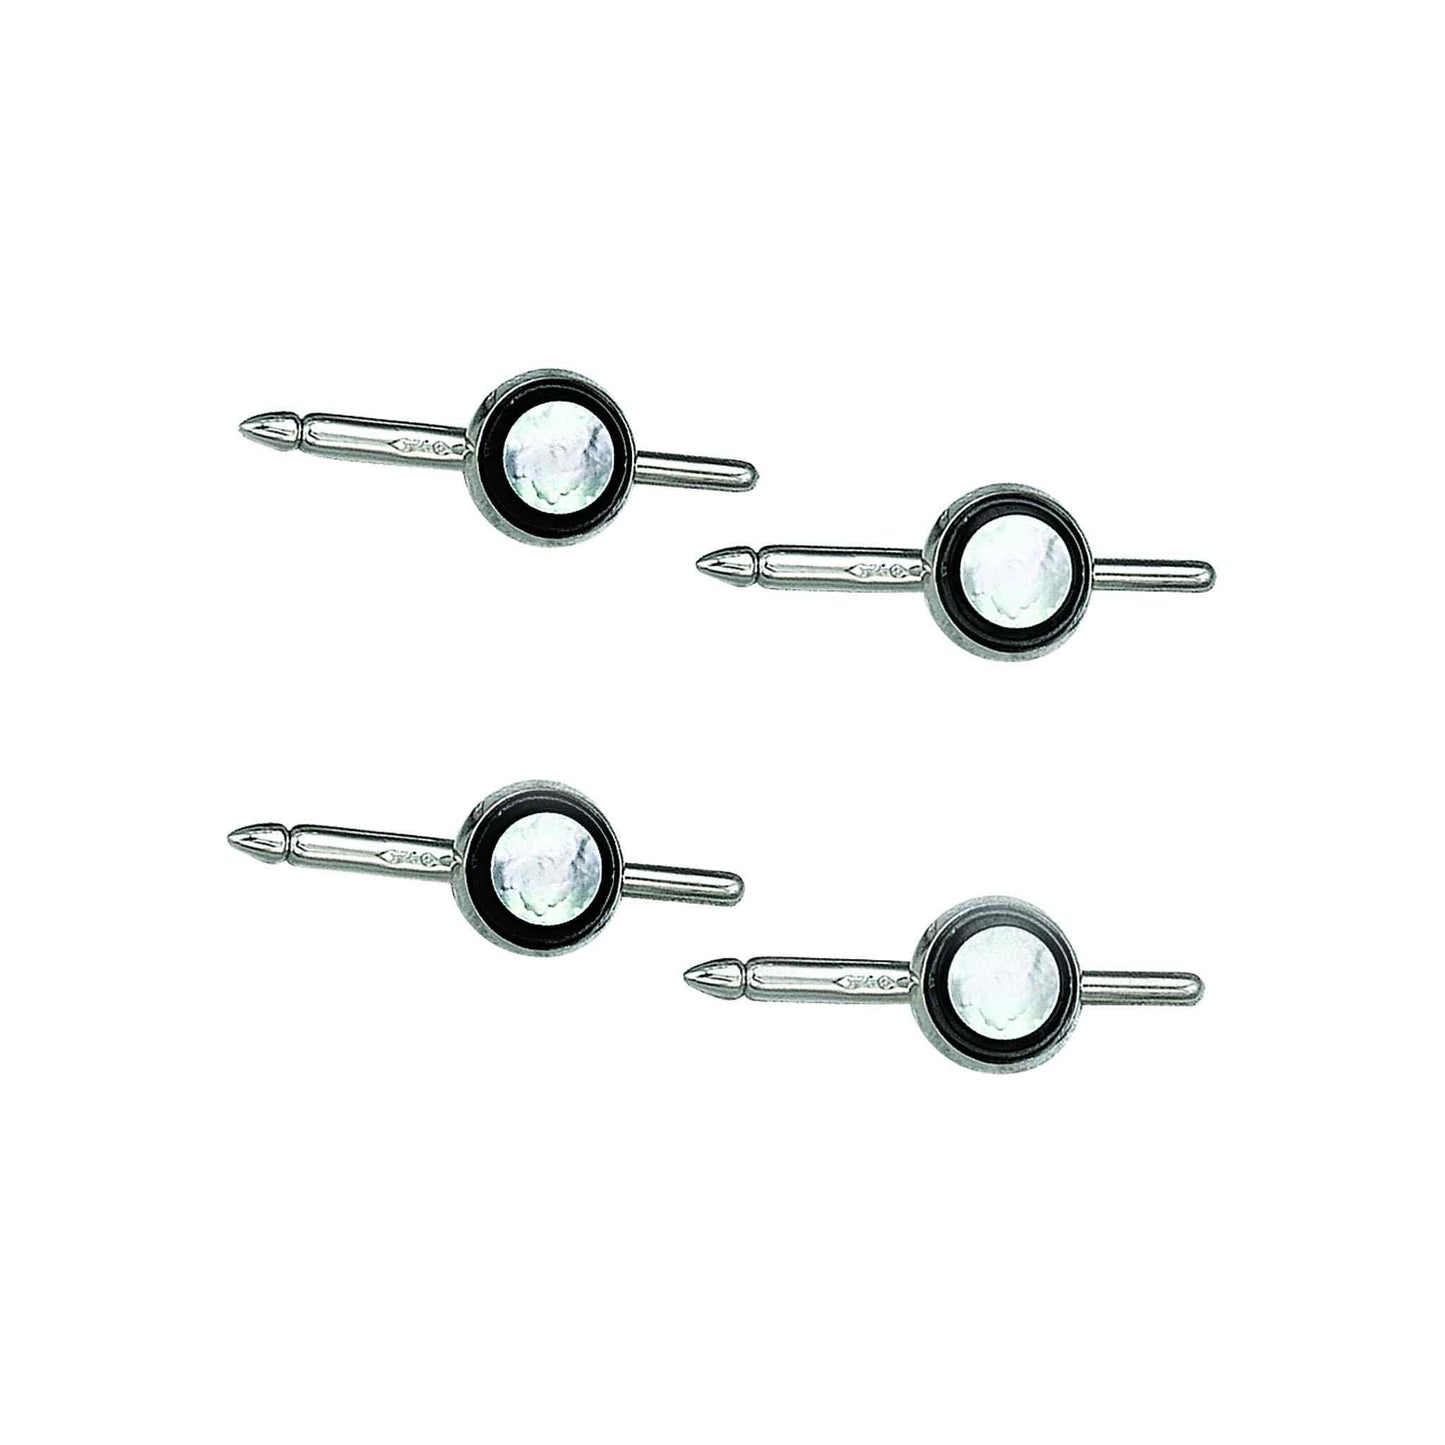 A four piece sterling silver 8mm round mother of pearl & onyx trim stud set displayed on a neutral white background.